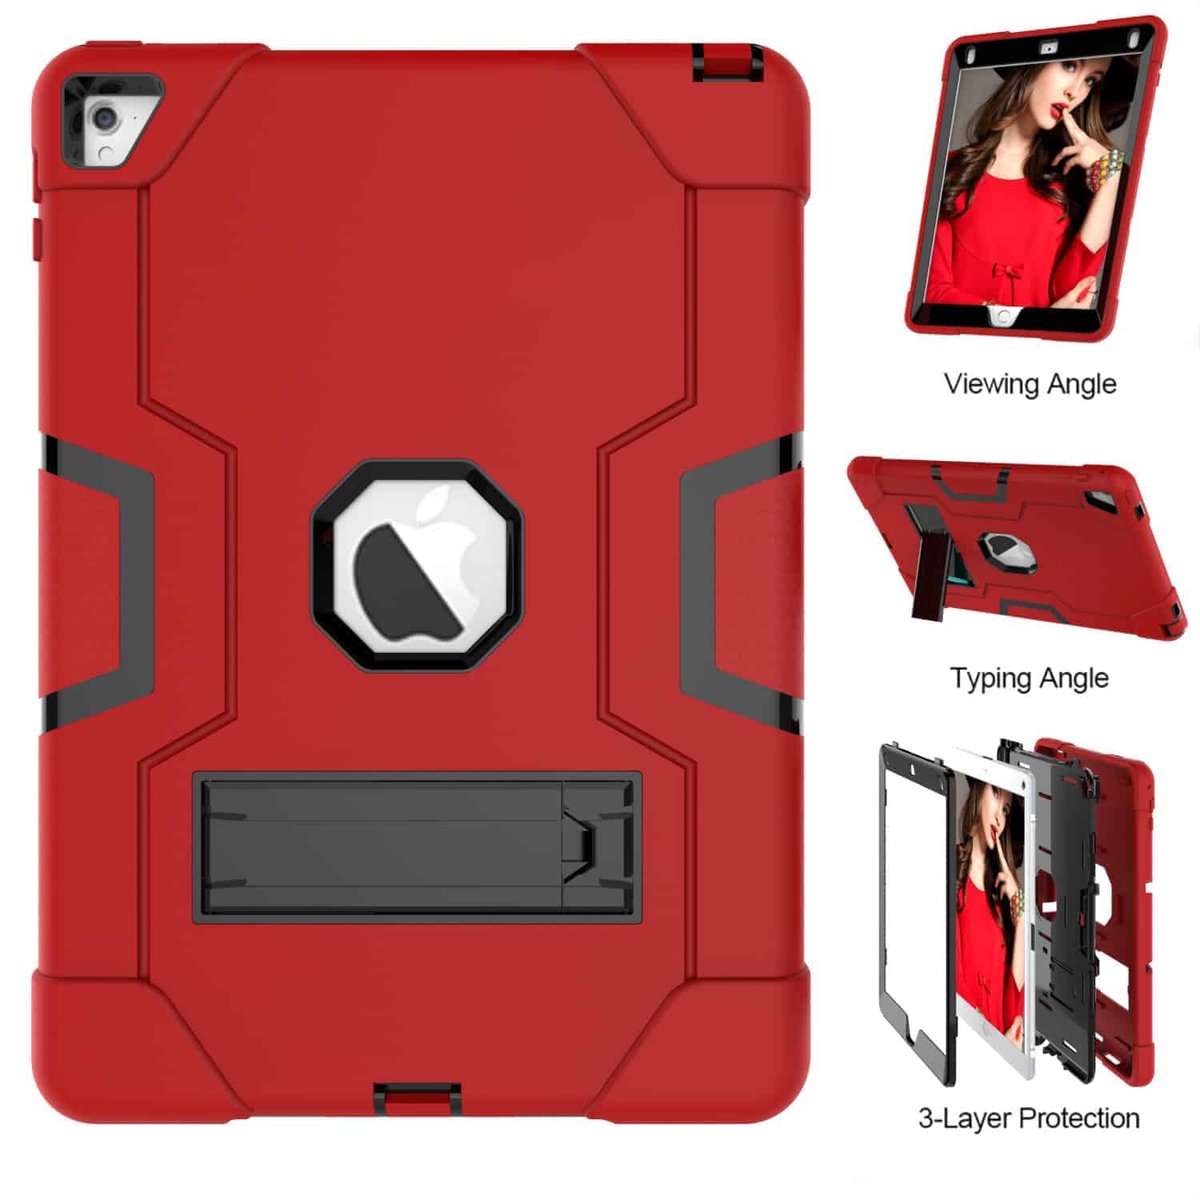 Geschikt Voor iPad Air 2 Hoes - 9.7 Inch - 2e Generatie - Air 2014 Hoes - Air 2 Case - Shockproof Case Cover - A1566 - A1567 - Backcover - Met Standaard - Extra Stevig - Schokbestendig - Rood